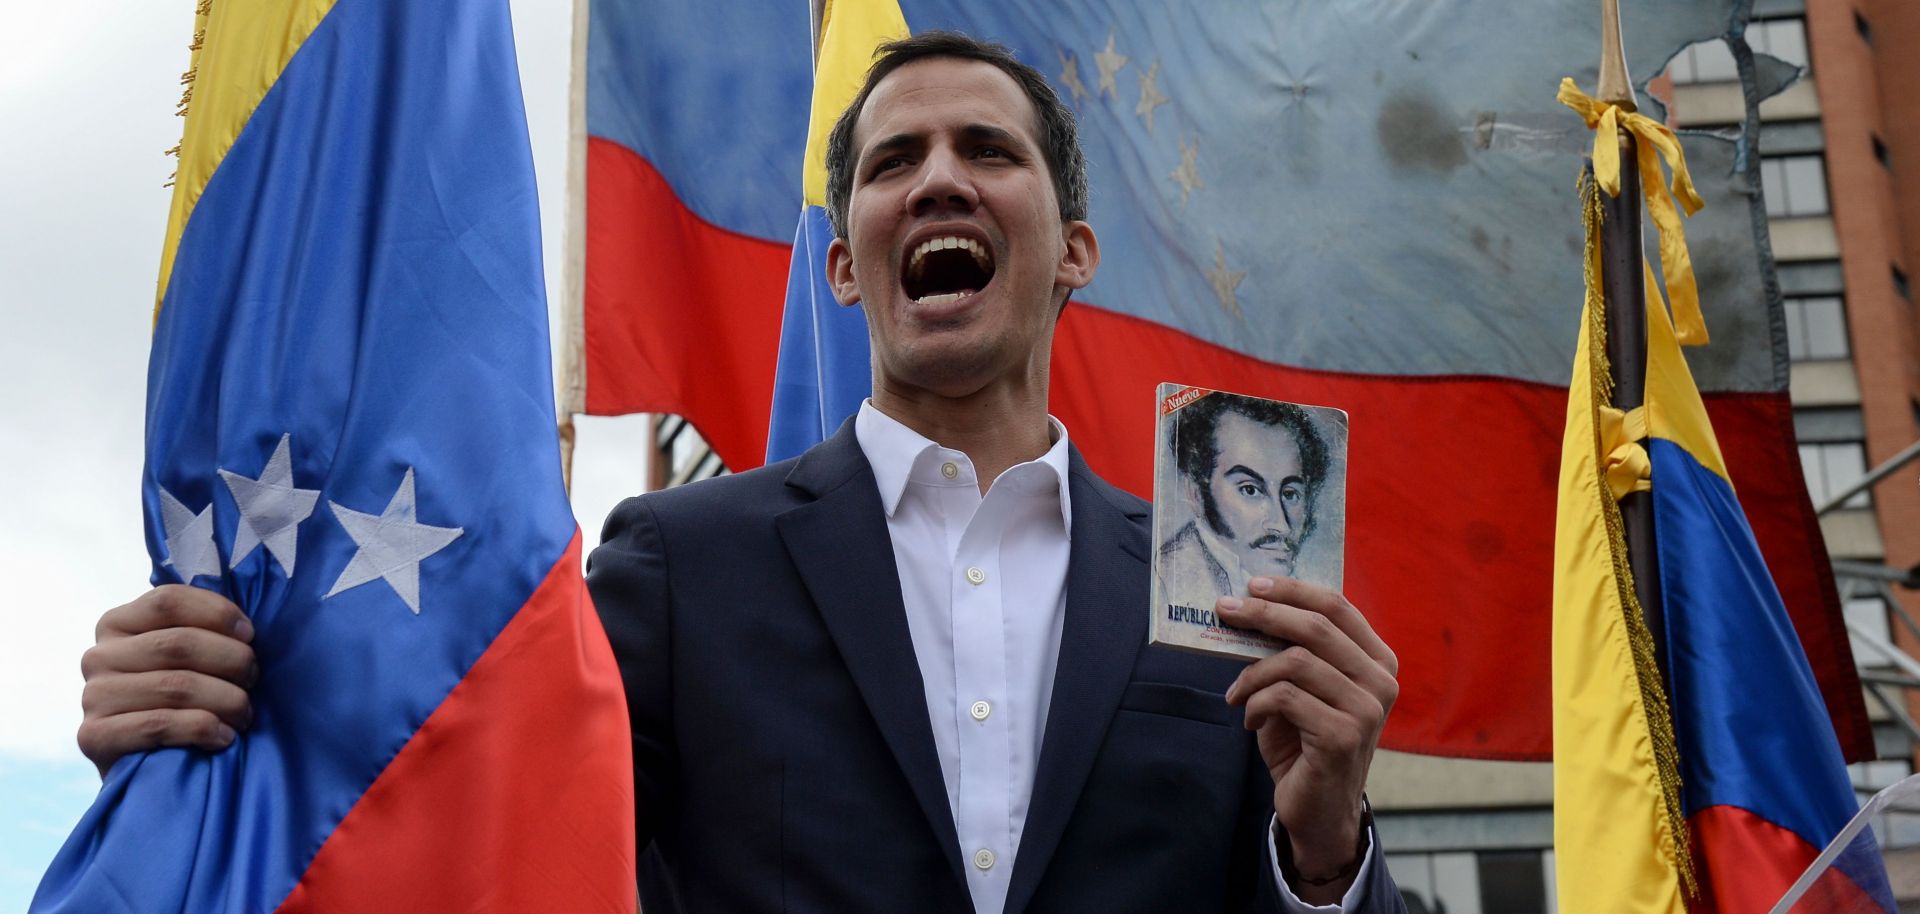 Juan Guaido, leader of Venezuela's opposition-controlled National Assembly, declares himself interim president during a rally in Caracas against President Nicolas Maduro on Jan. 23, 2019.